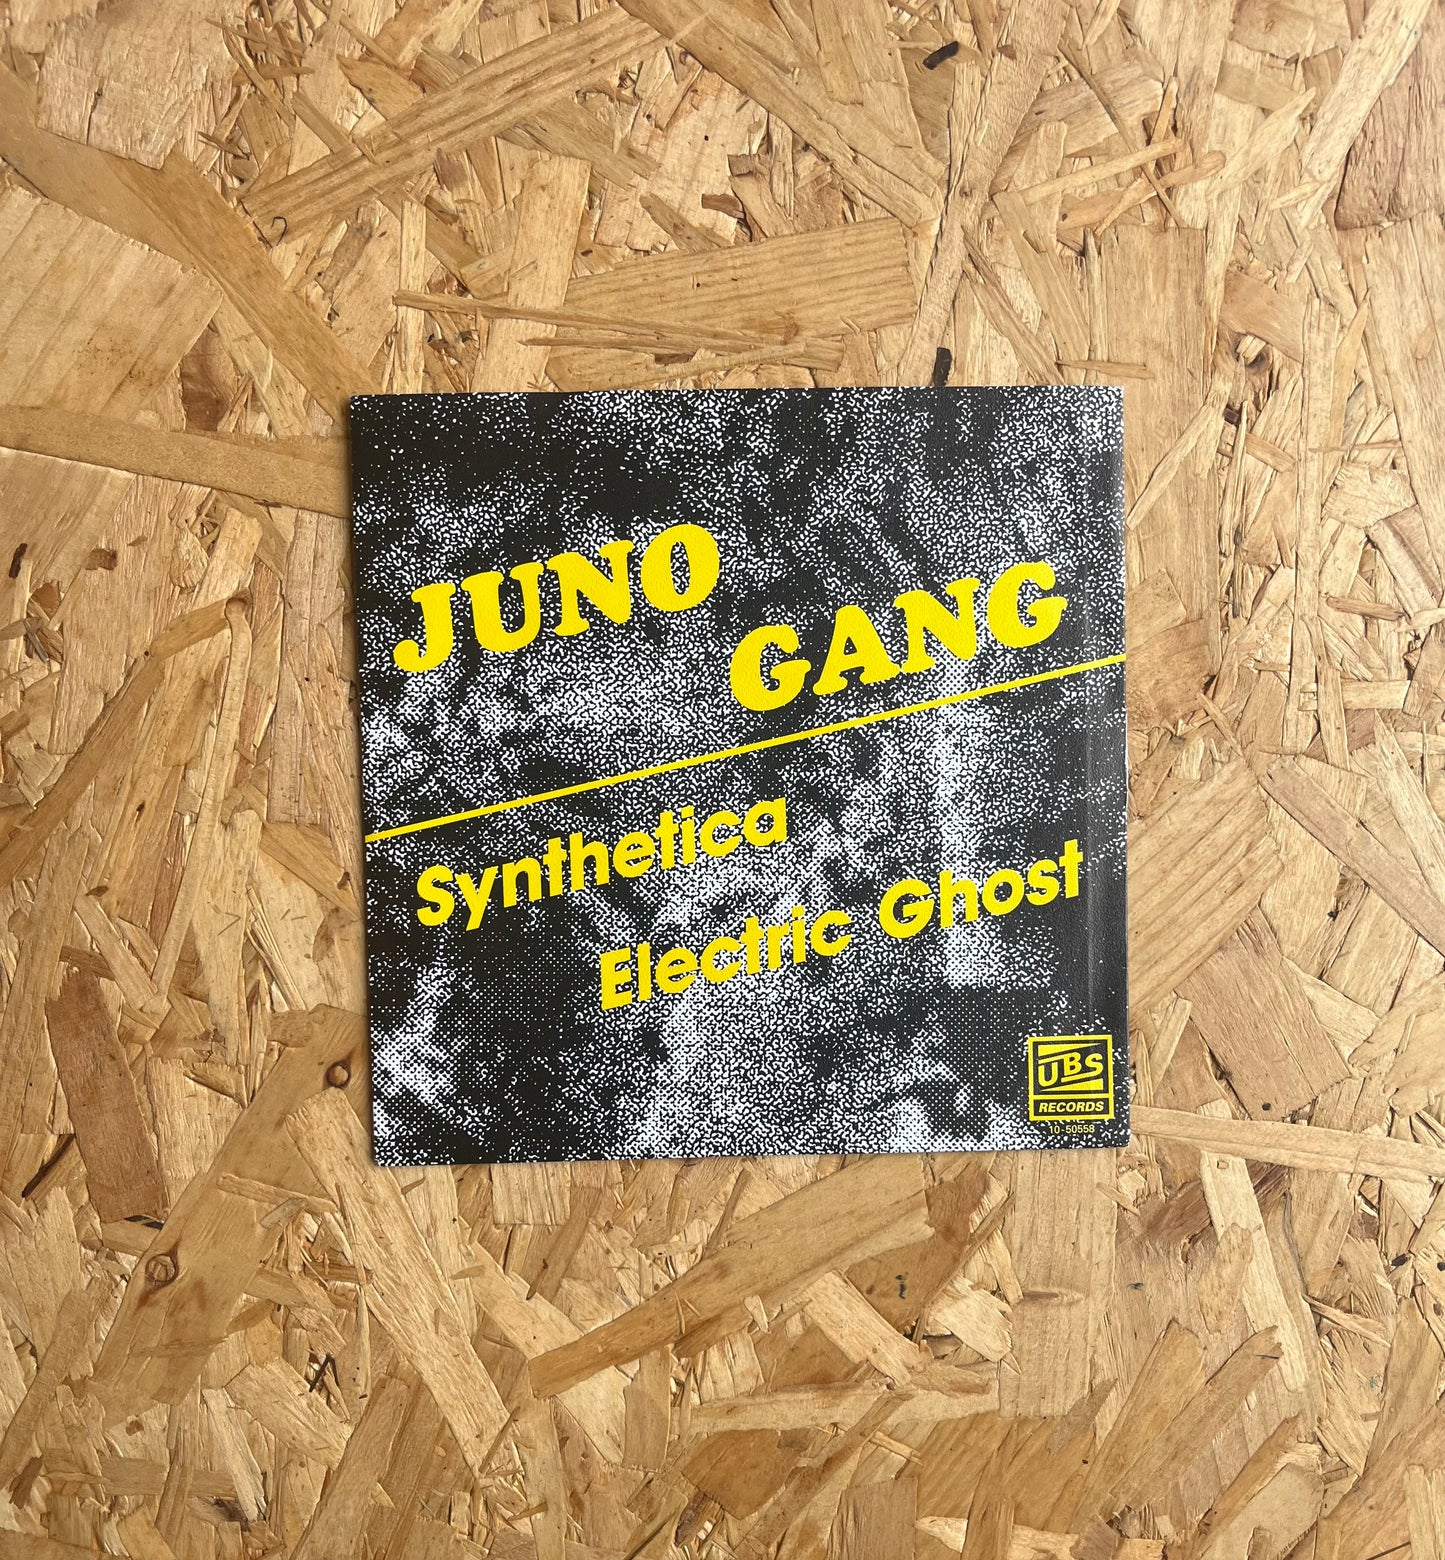 Juno Gang – Synthetica / Electric Ghost